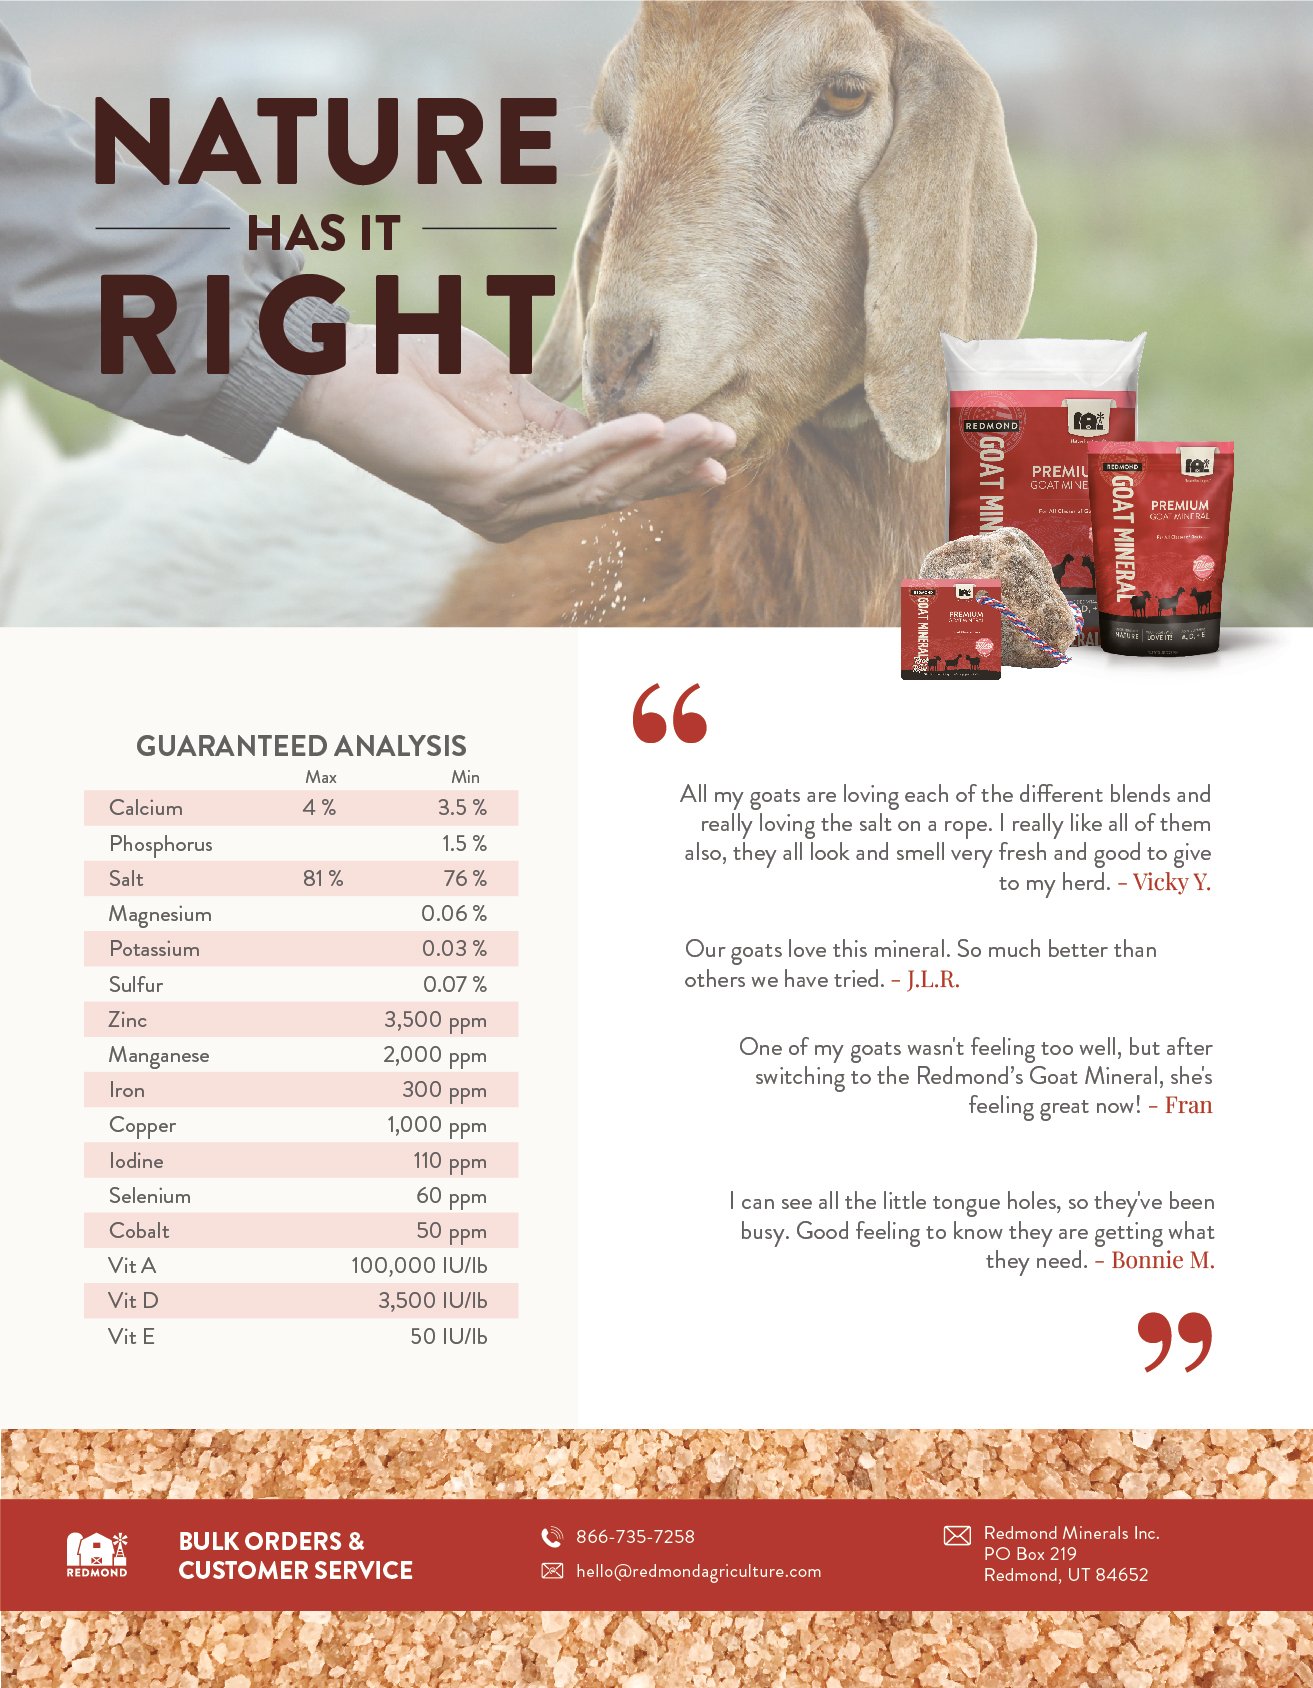 Nature has it right. Redmond Goat Mineral Mix is completely natural.